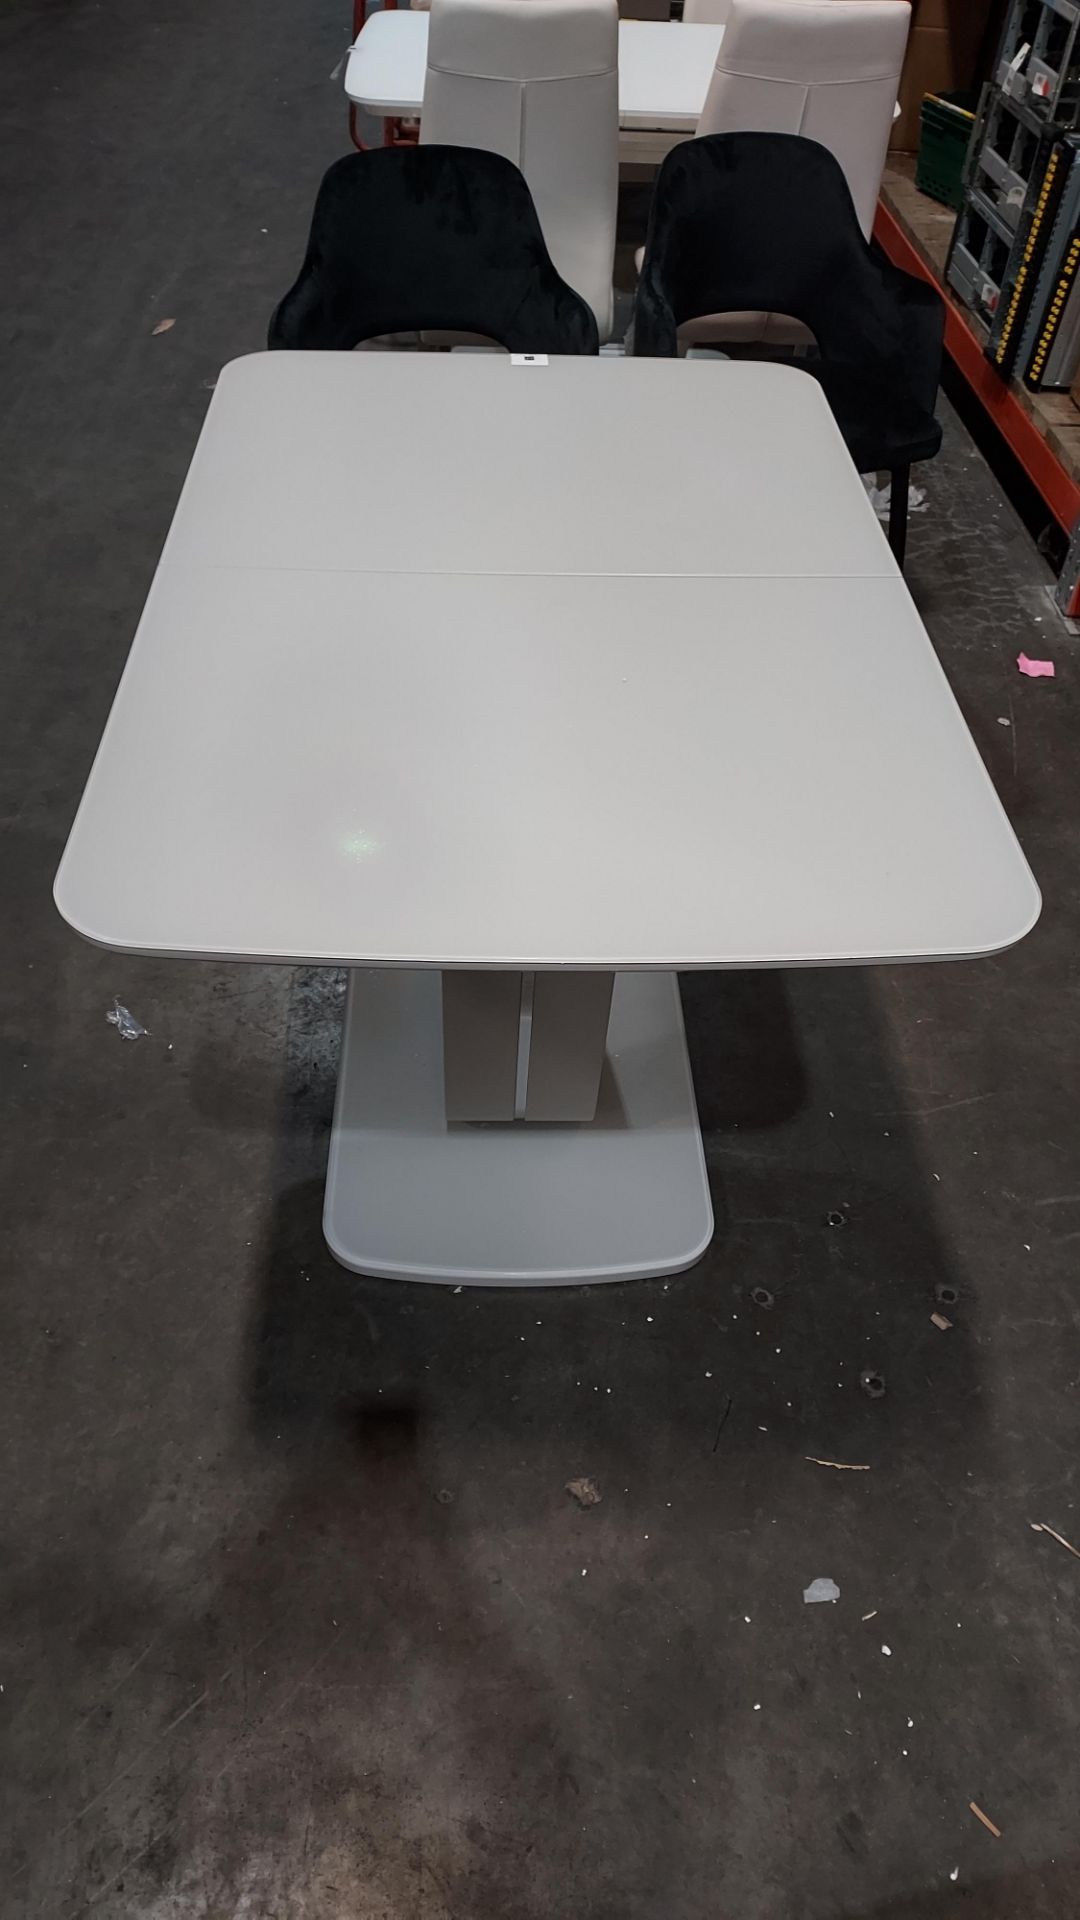 1 X BOXED LAZZARO EXTENDABLE DINING TABLE IN LIGHT GREY ( L 120-160 CM X W 90 CM X H 76 CM ) - IN